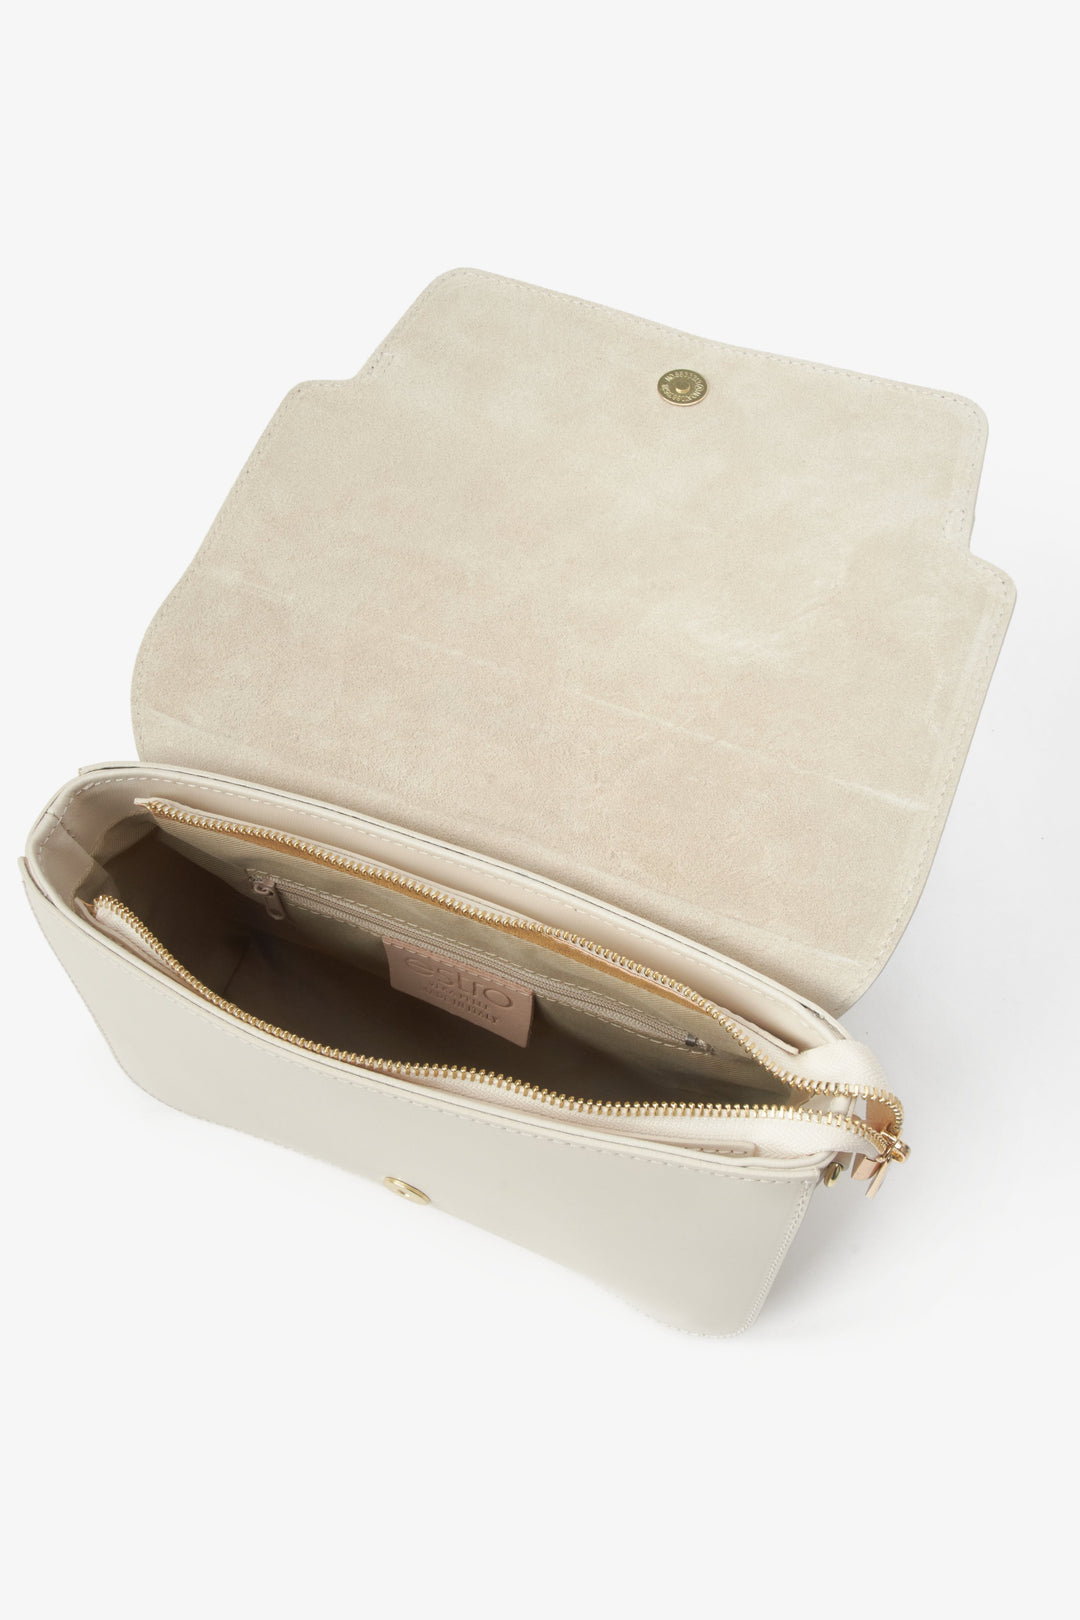 Women's shoulder bag made of Italian leather in beige - lining.